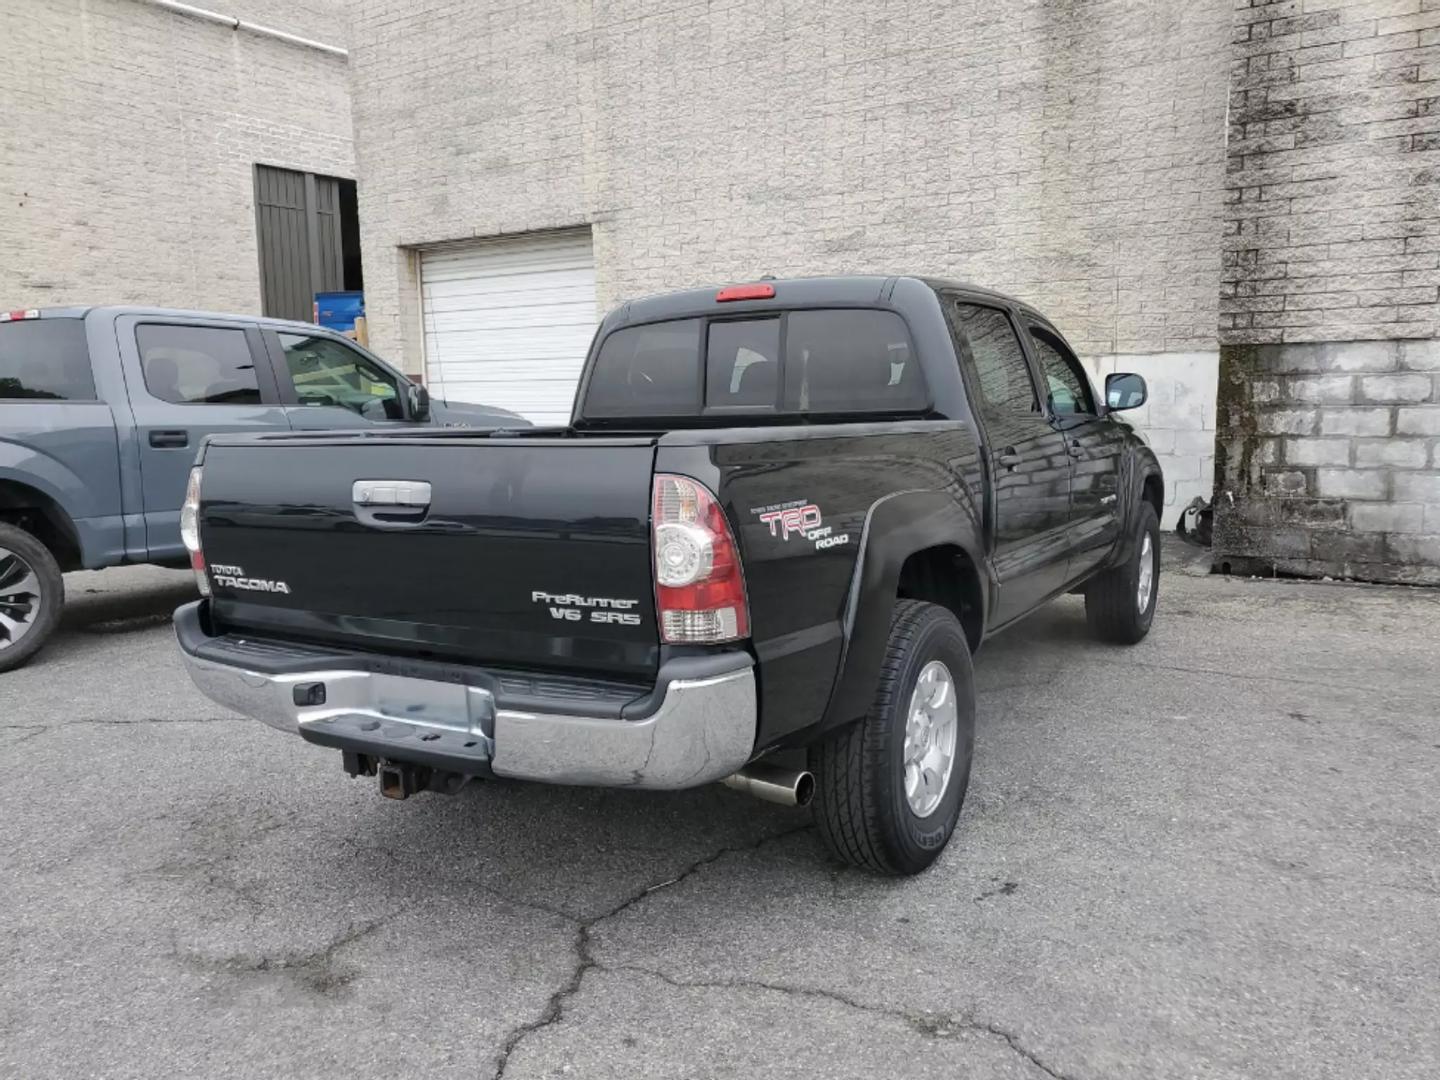 2009 TOYOTA TACOMA DOUBLE CAB $695 DOWN & DRIVE IN 1 HOUR.